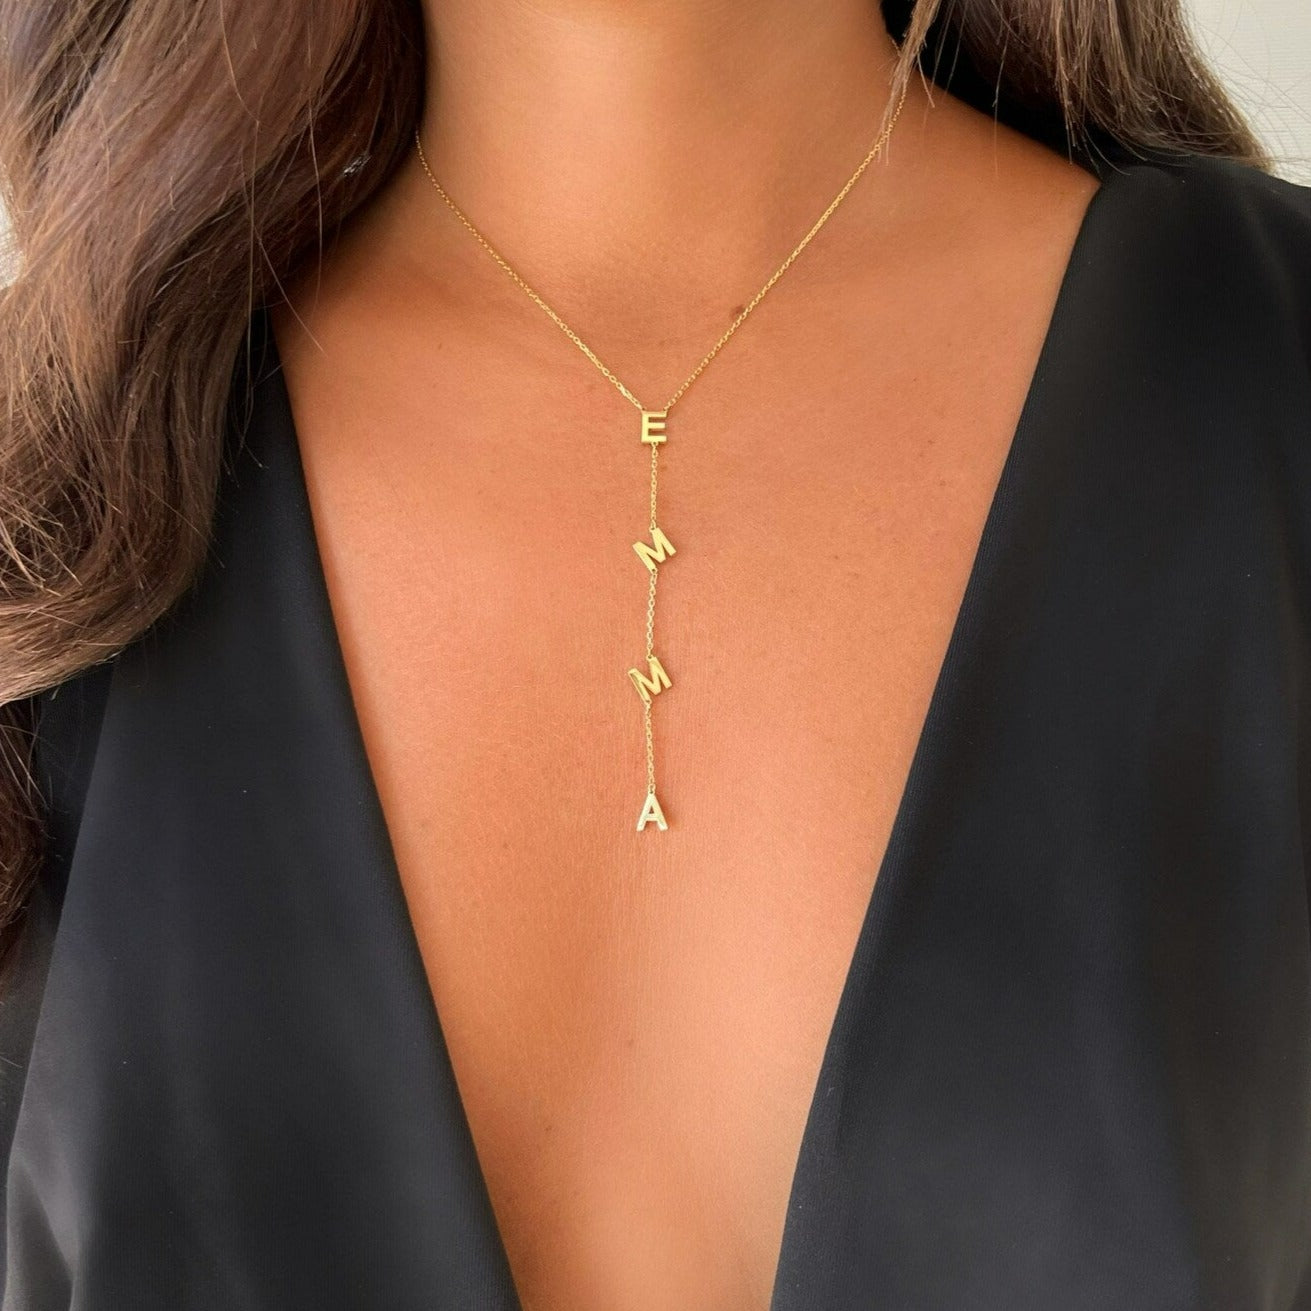 Y-Shaped Letter Gold Necklace. Designed and handcrafted in the UAE. This Y-Shaped Letter Gold Necklace is locally handcrafted with the highest quality materials and artisans available in Dubai.